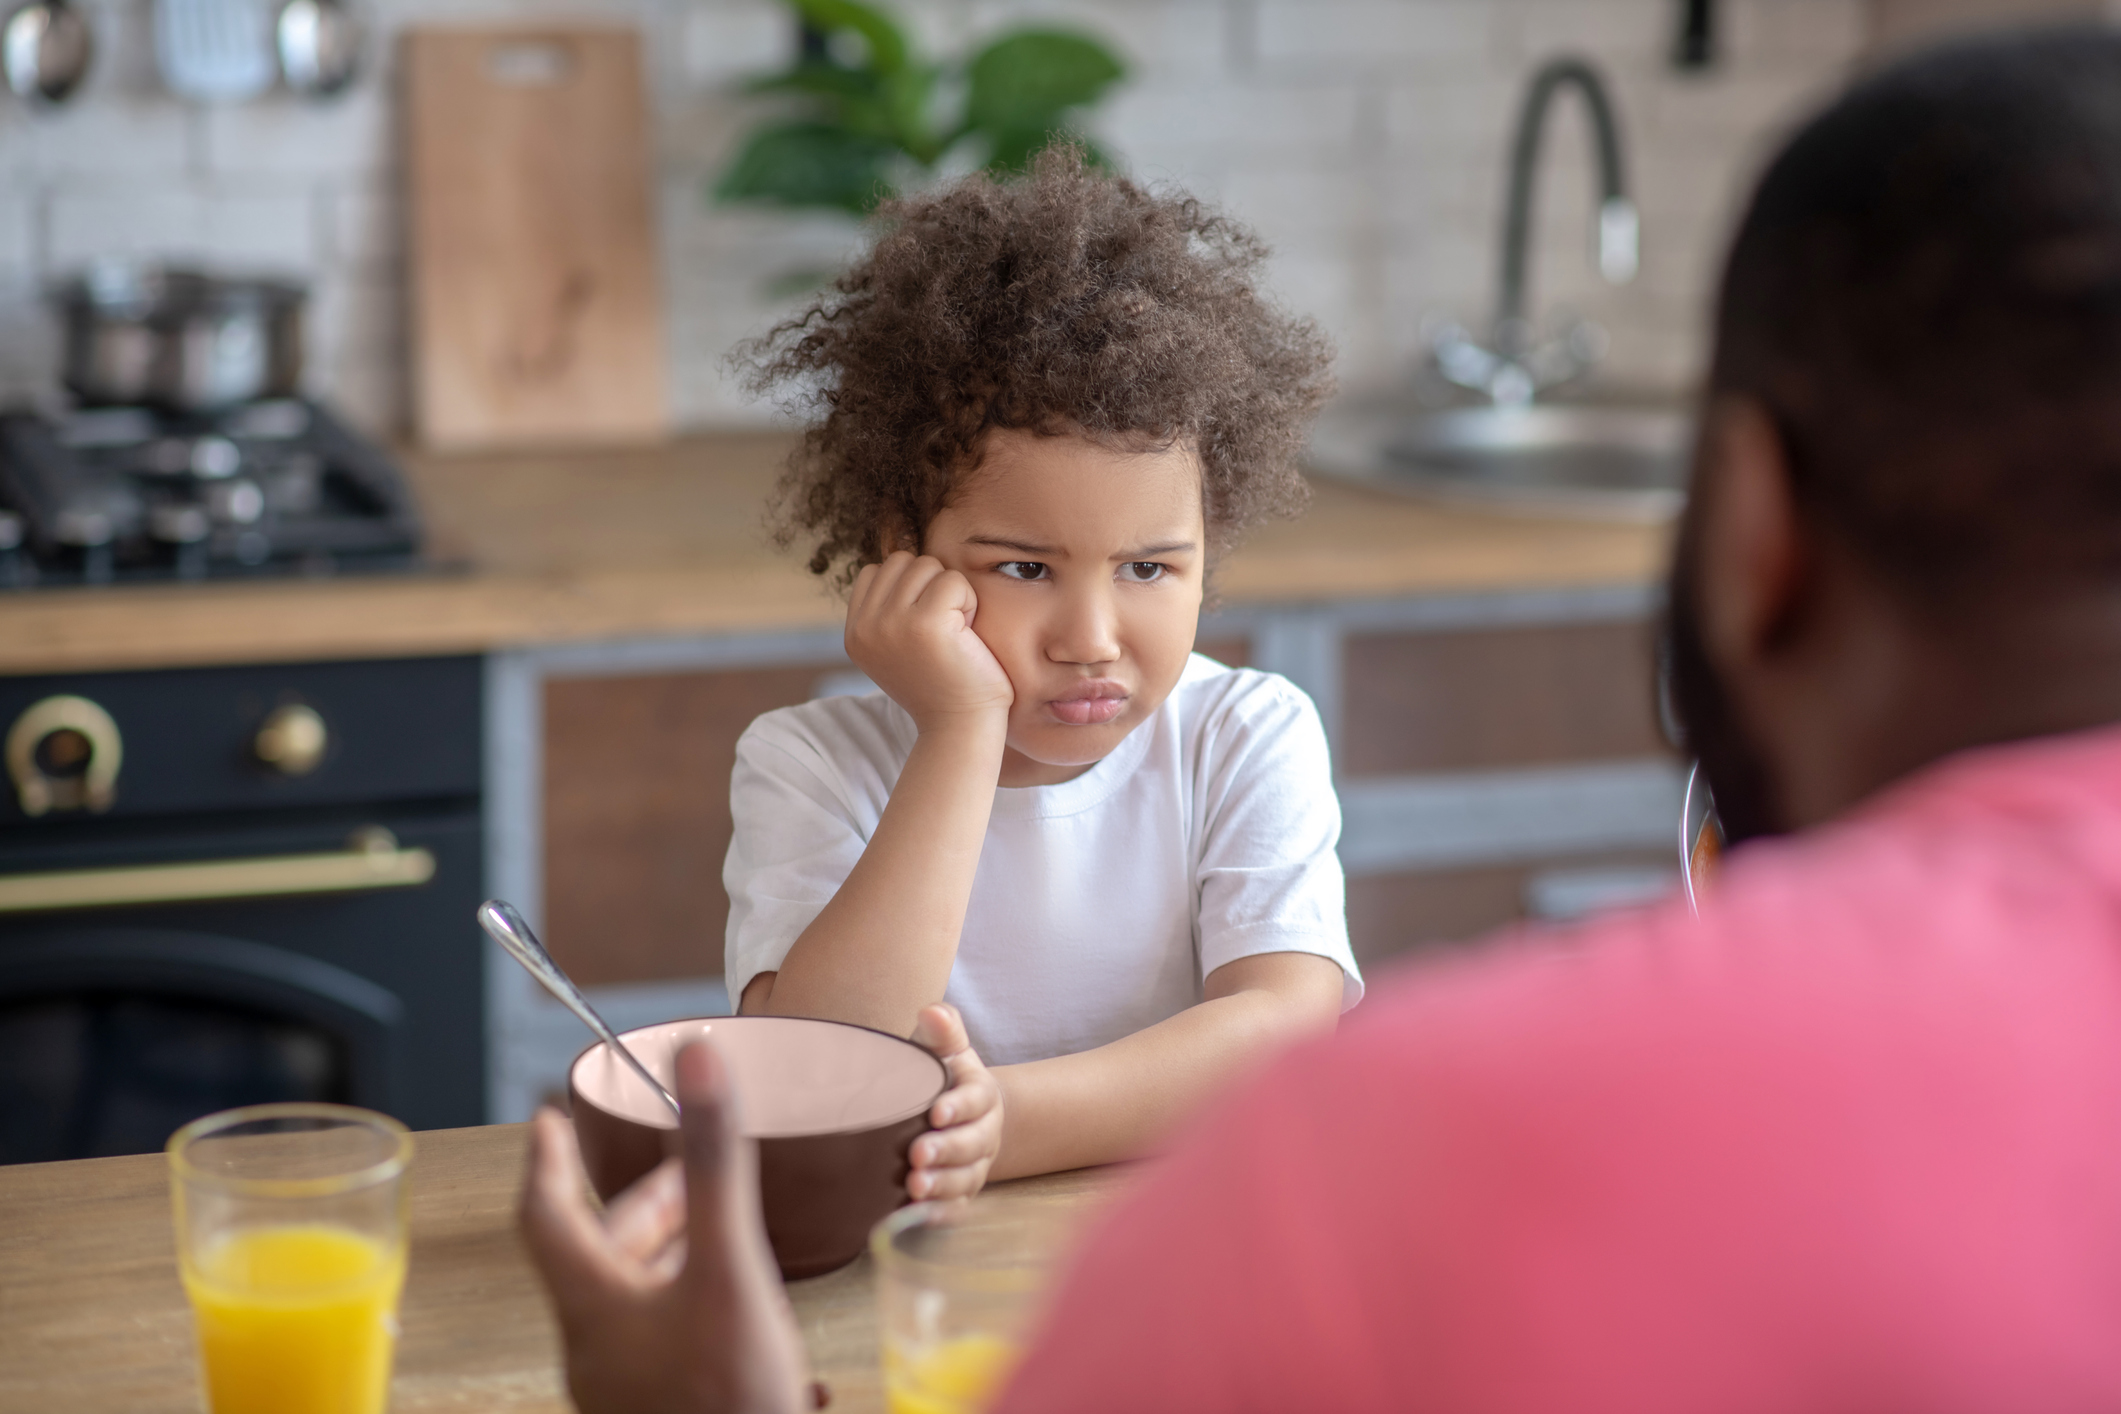 Solve Picky Eating: 11 Expert Tips for Parents of Picky Eaters